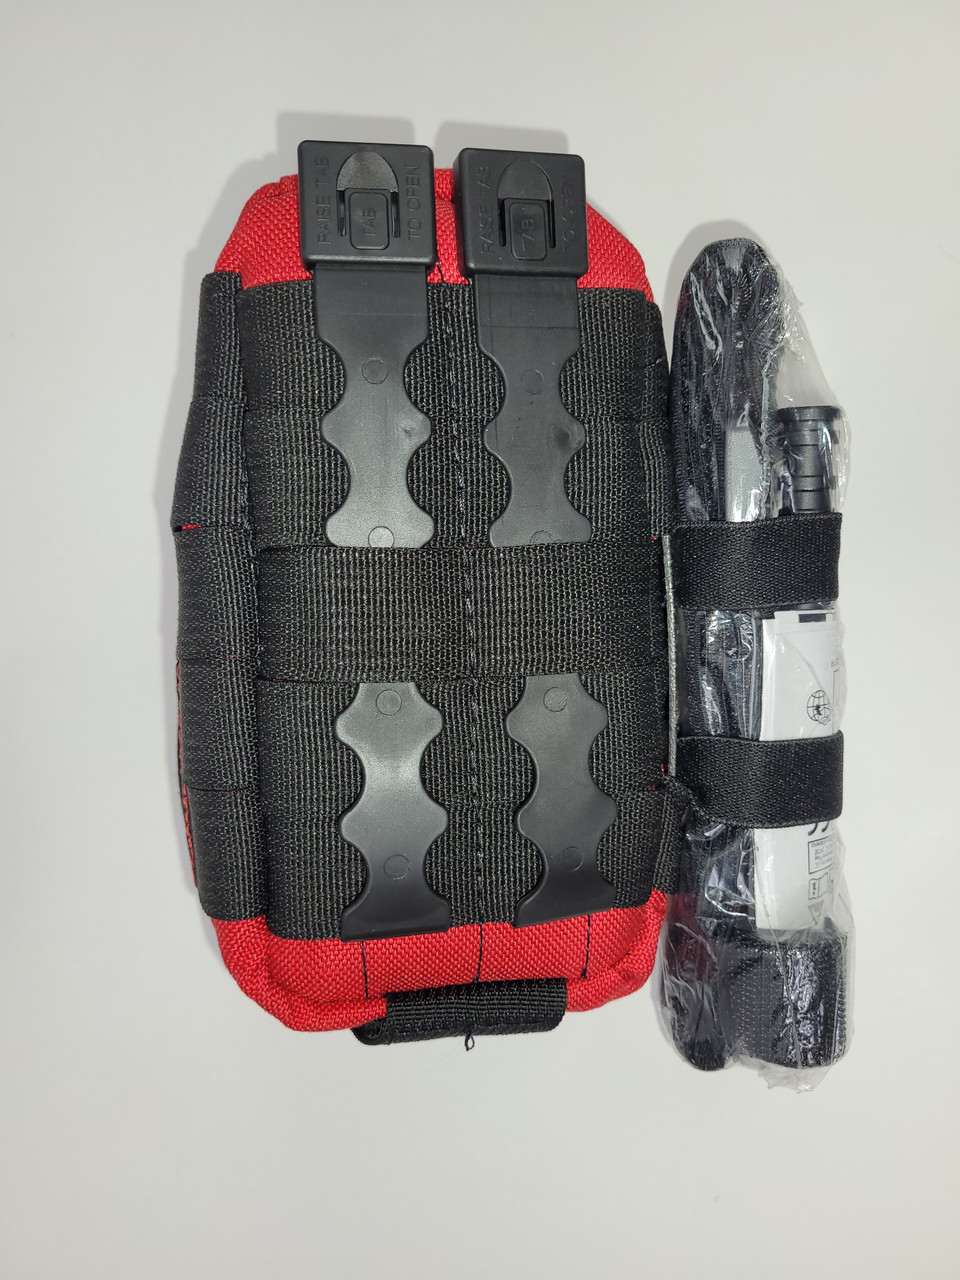 Medical Carrier Pouch Kit